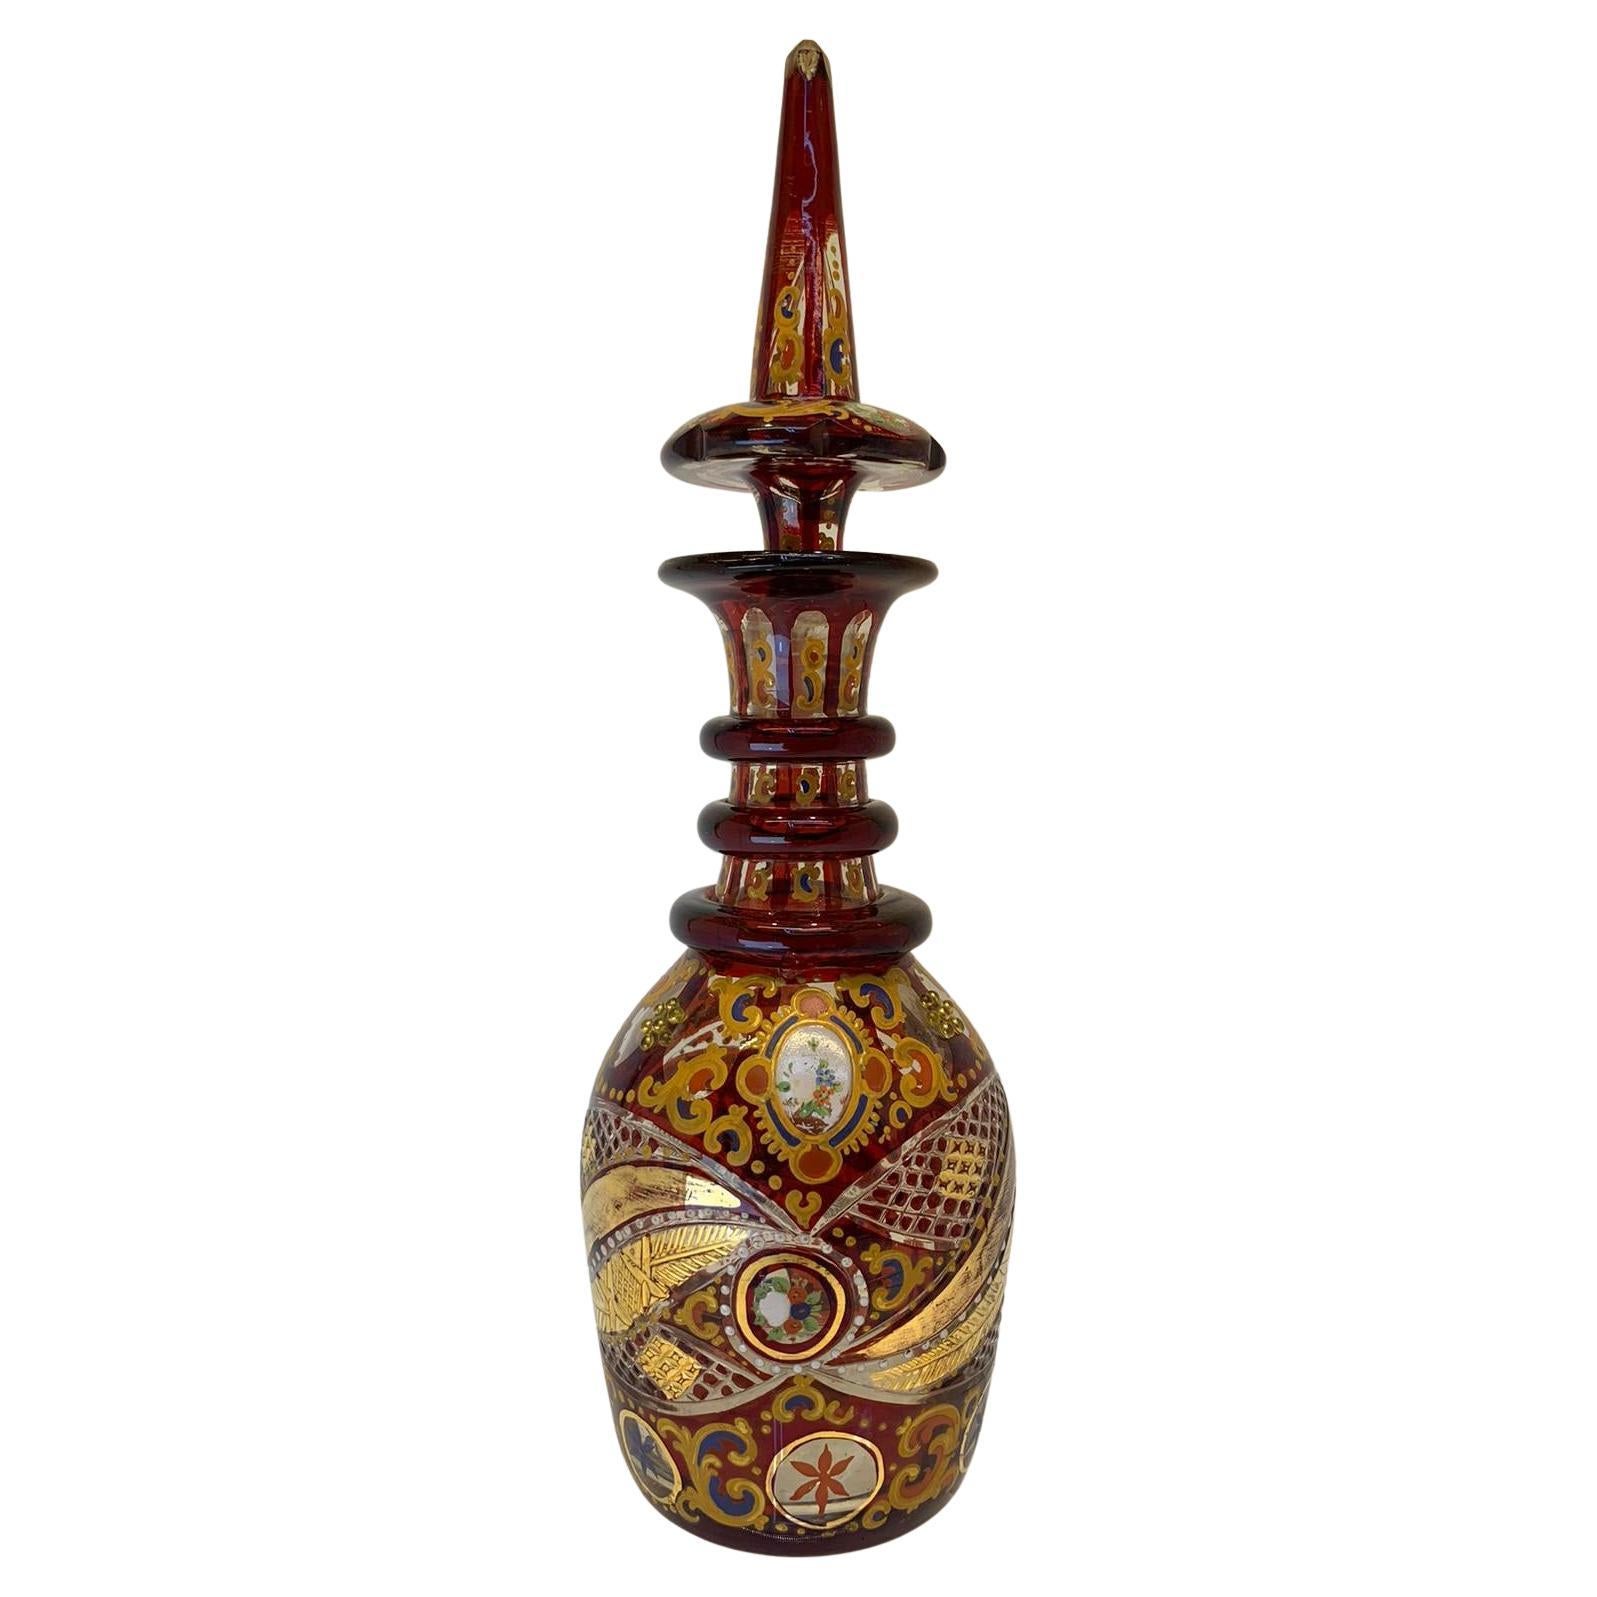 Antique Ruby Enamelled Glass Decanter, Bohemian for Islamic Market, 19th Century